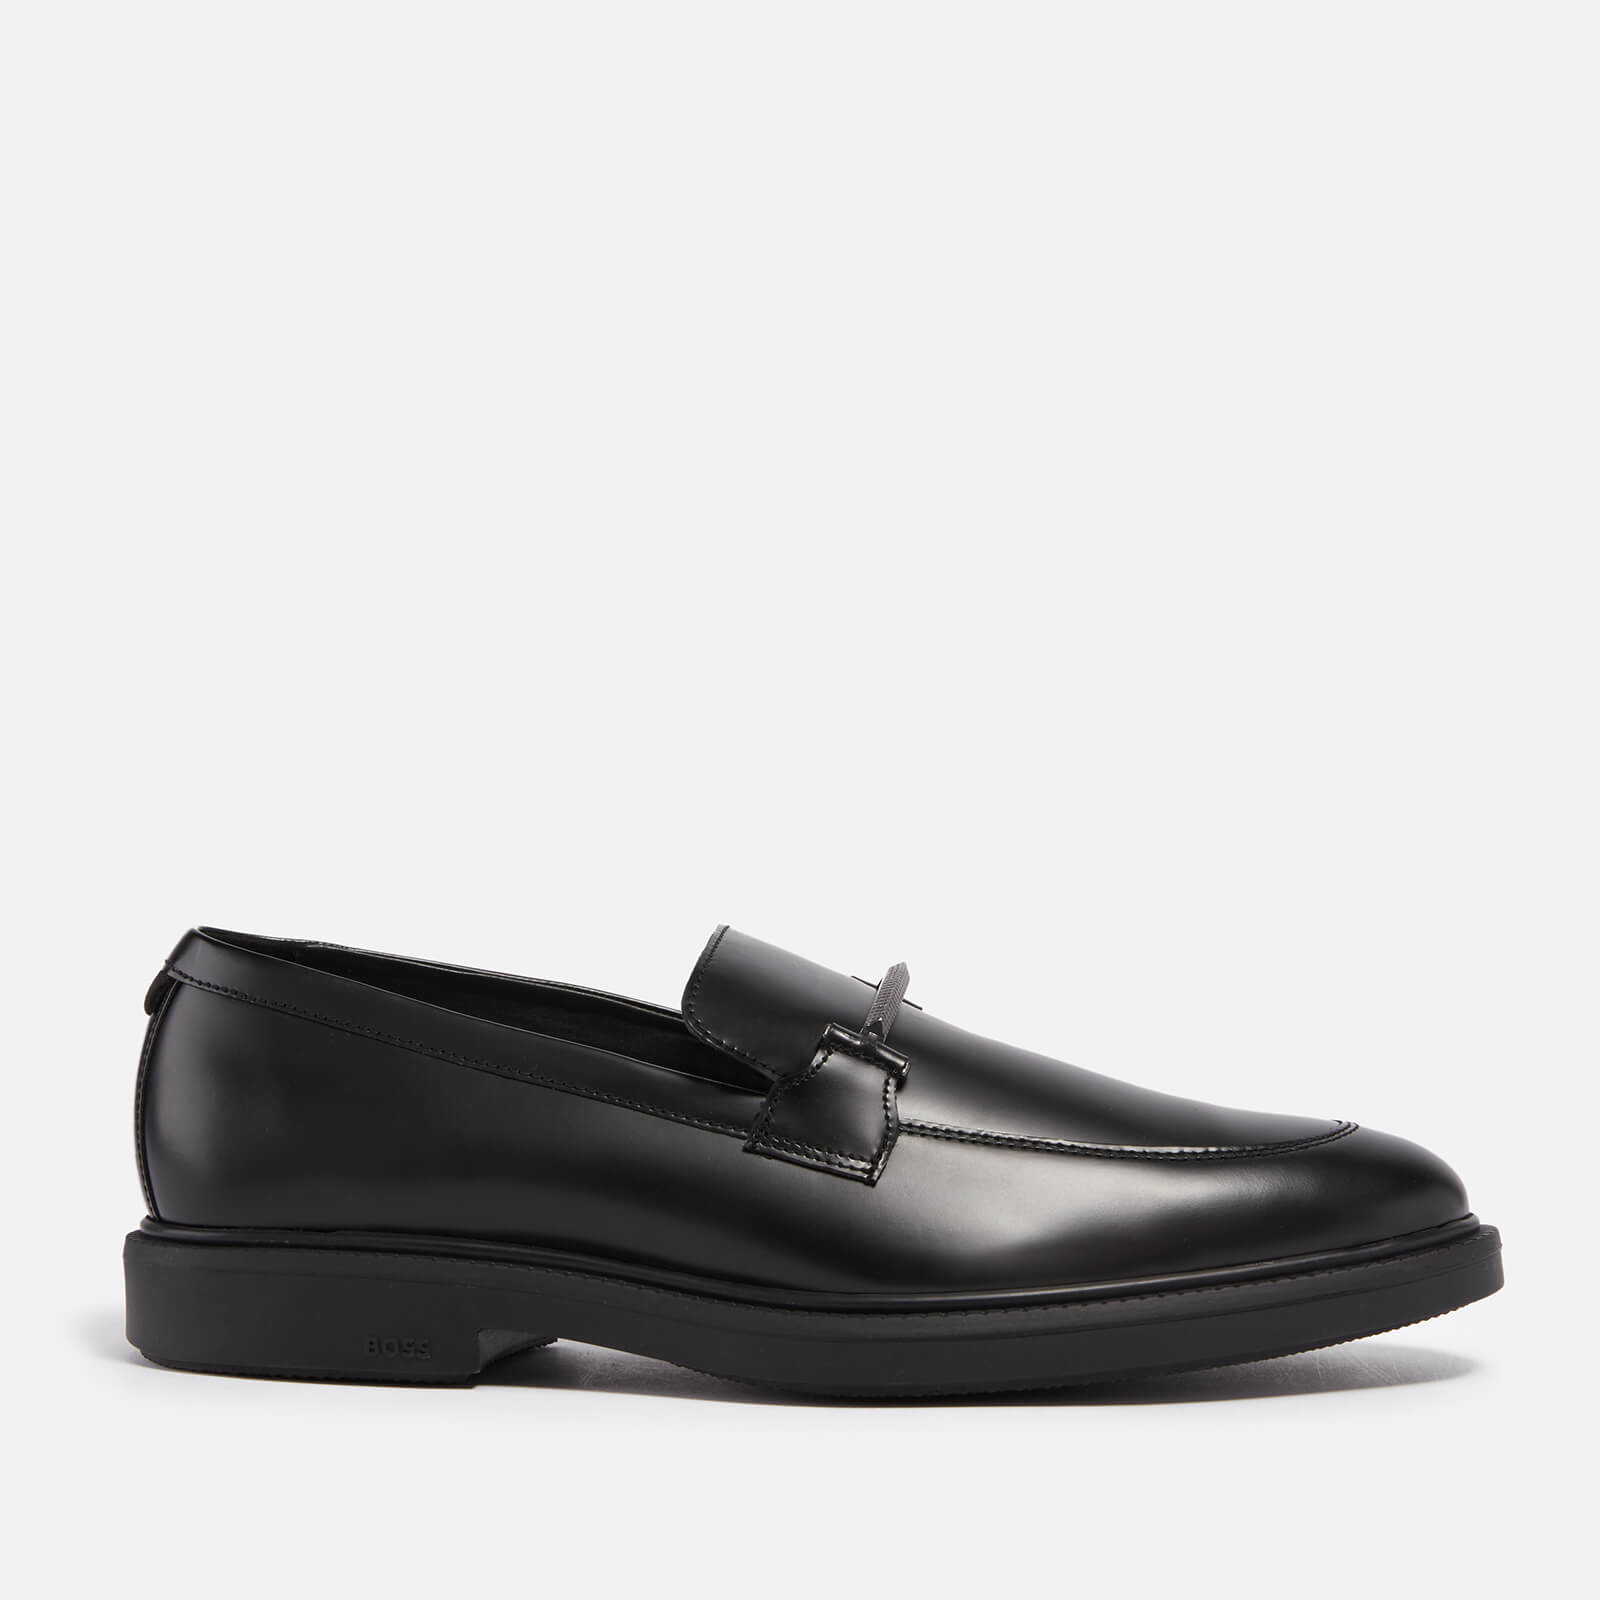 BOSS Men’s Larry Moccassin Loafers